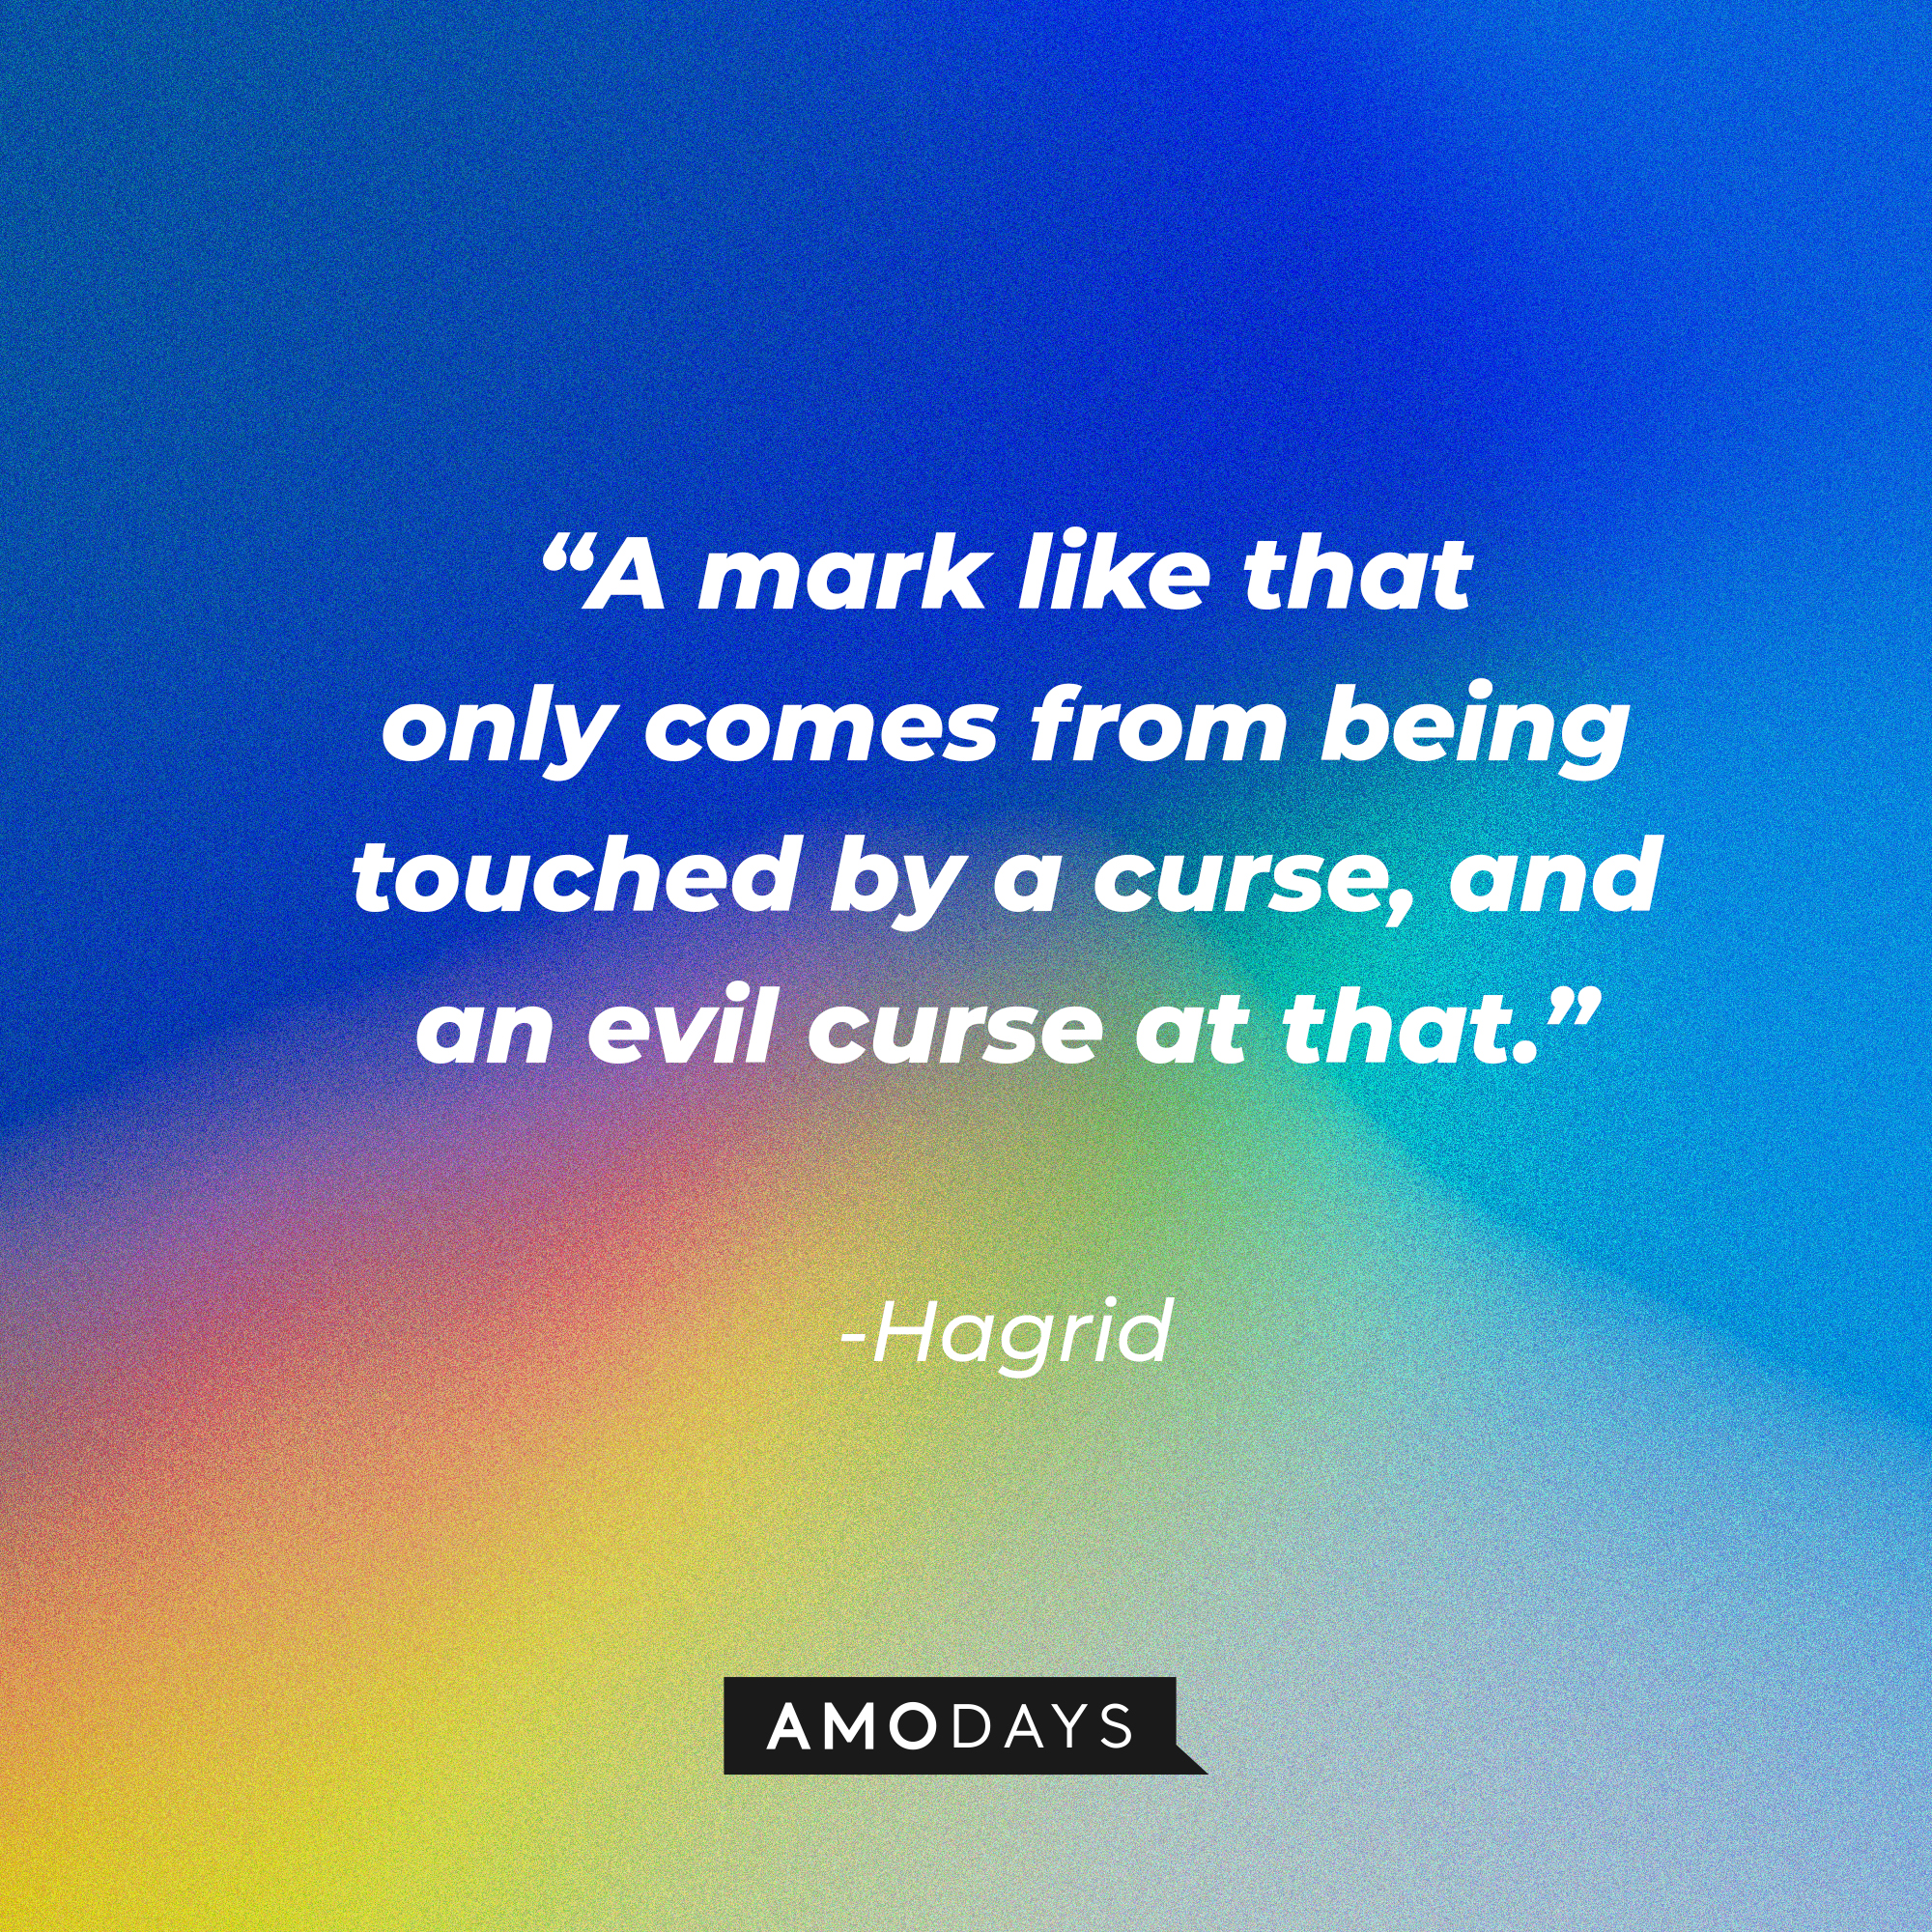 Hagrid's quote: "A mark like that only comes from being touched by a curse, and an evil curse at that." | Source: AmoDays